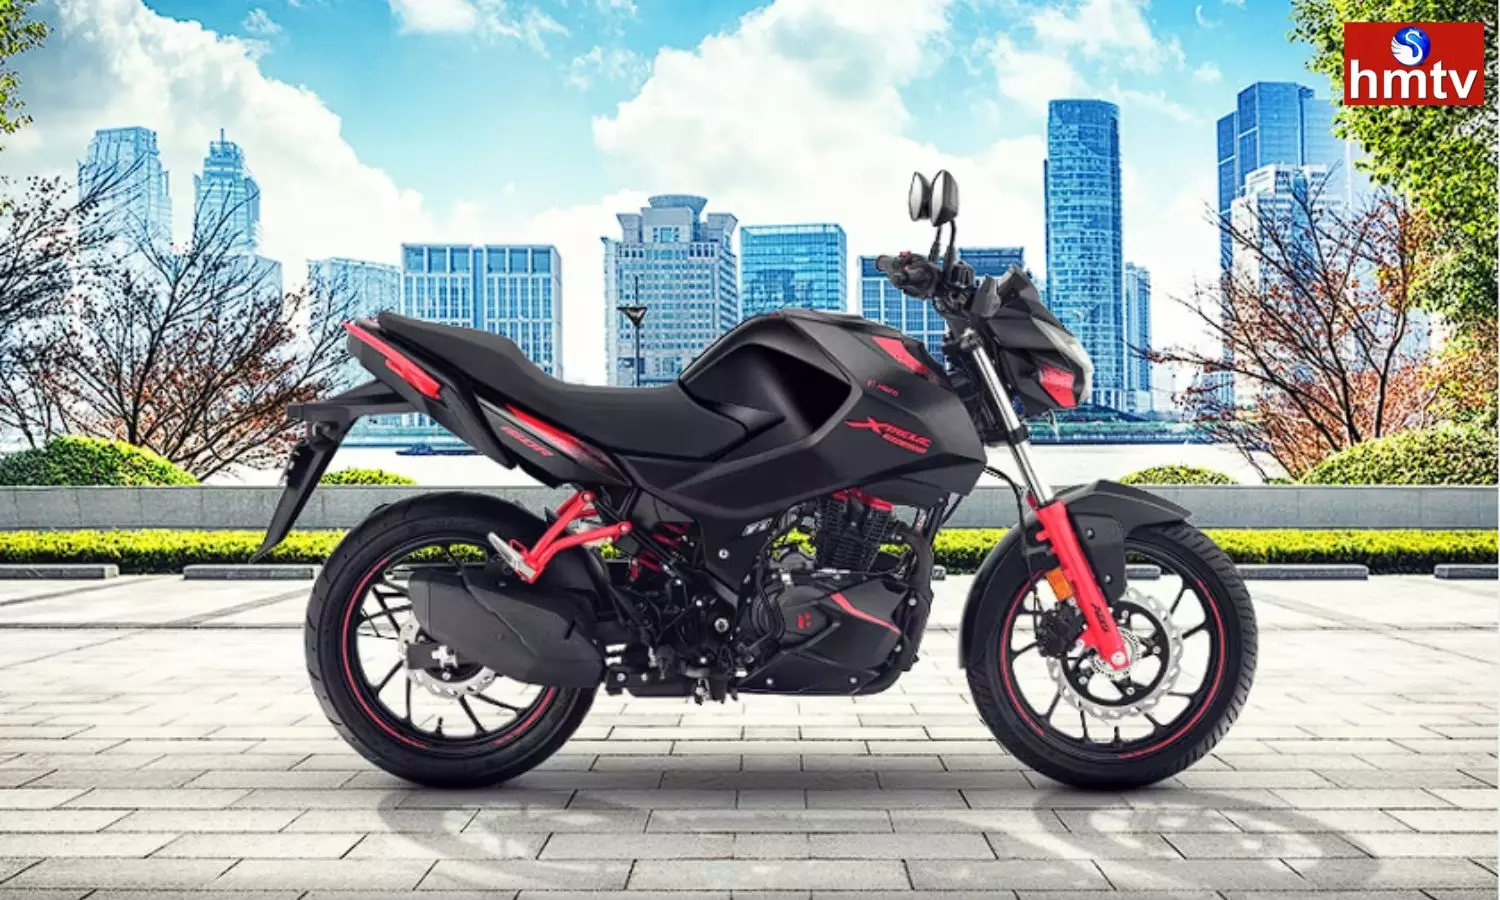 Hero Xtreme 160R Comes with 160cc Bike and also Claimed to be the Fastest Motorcycle in India